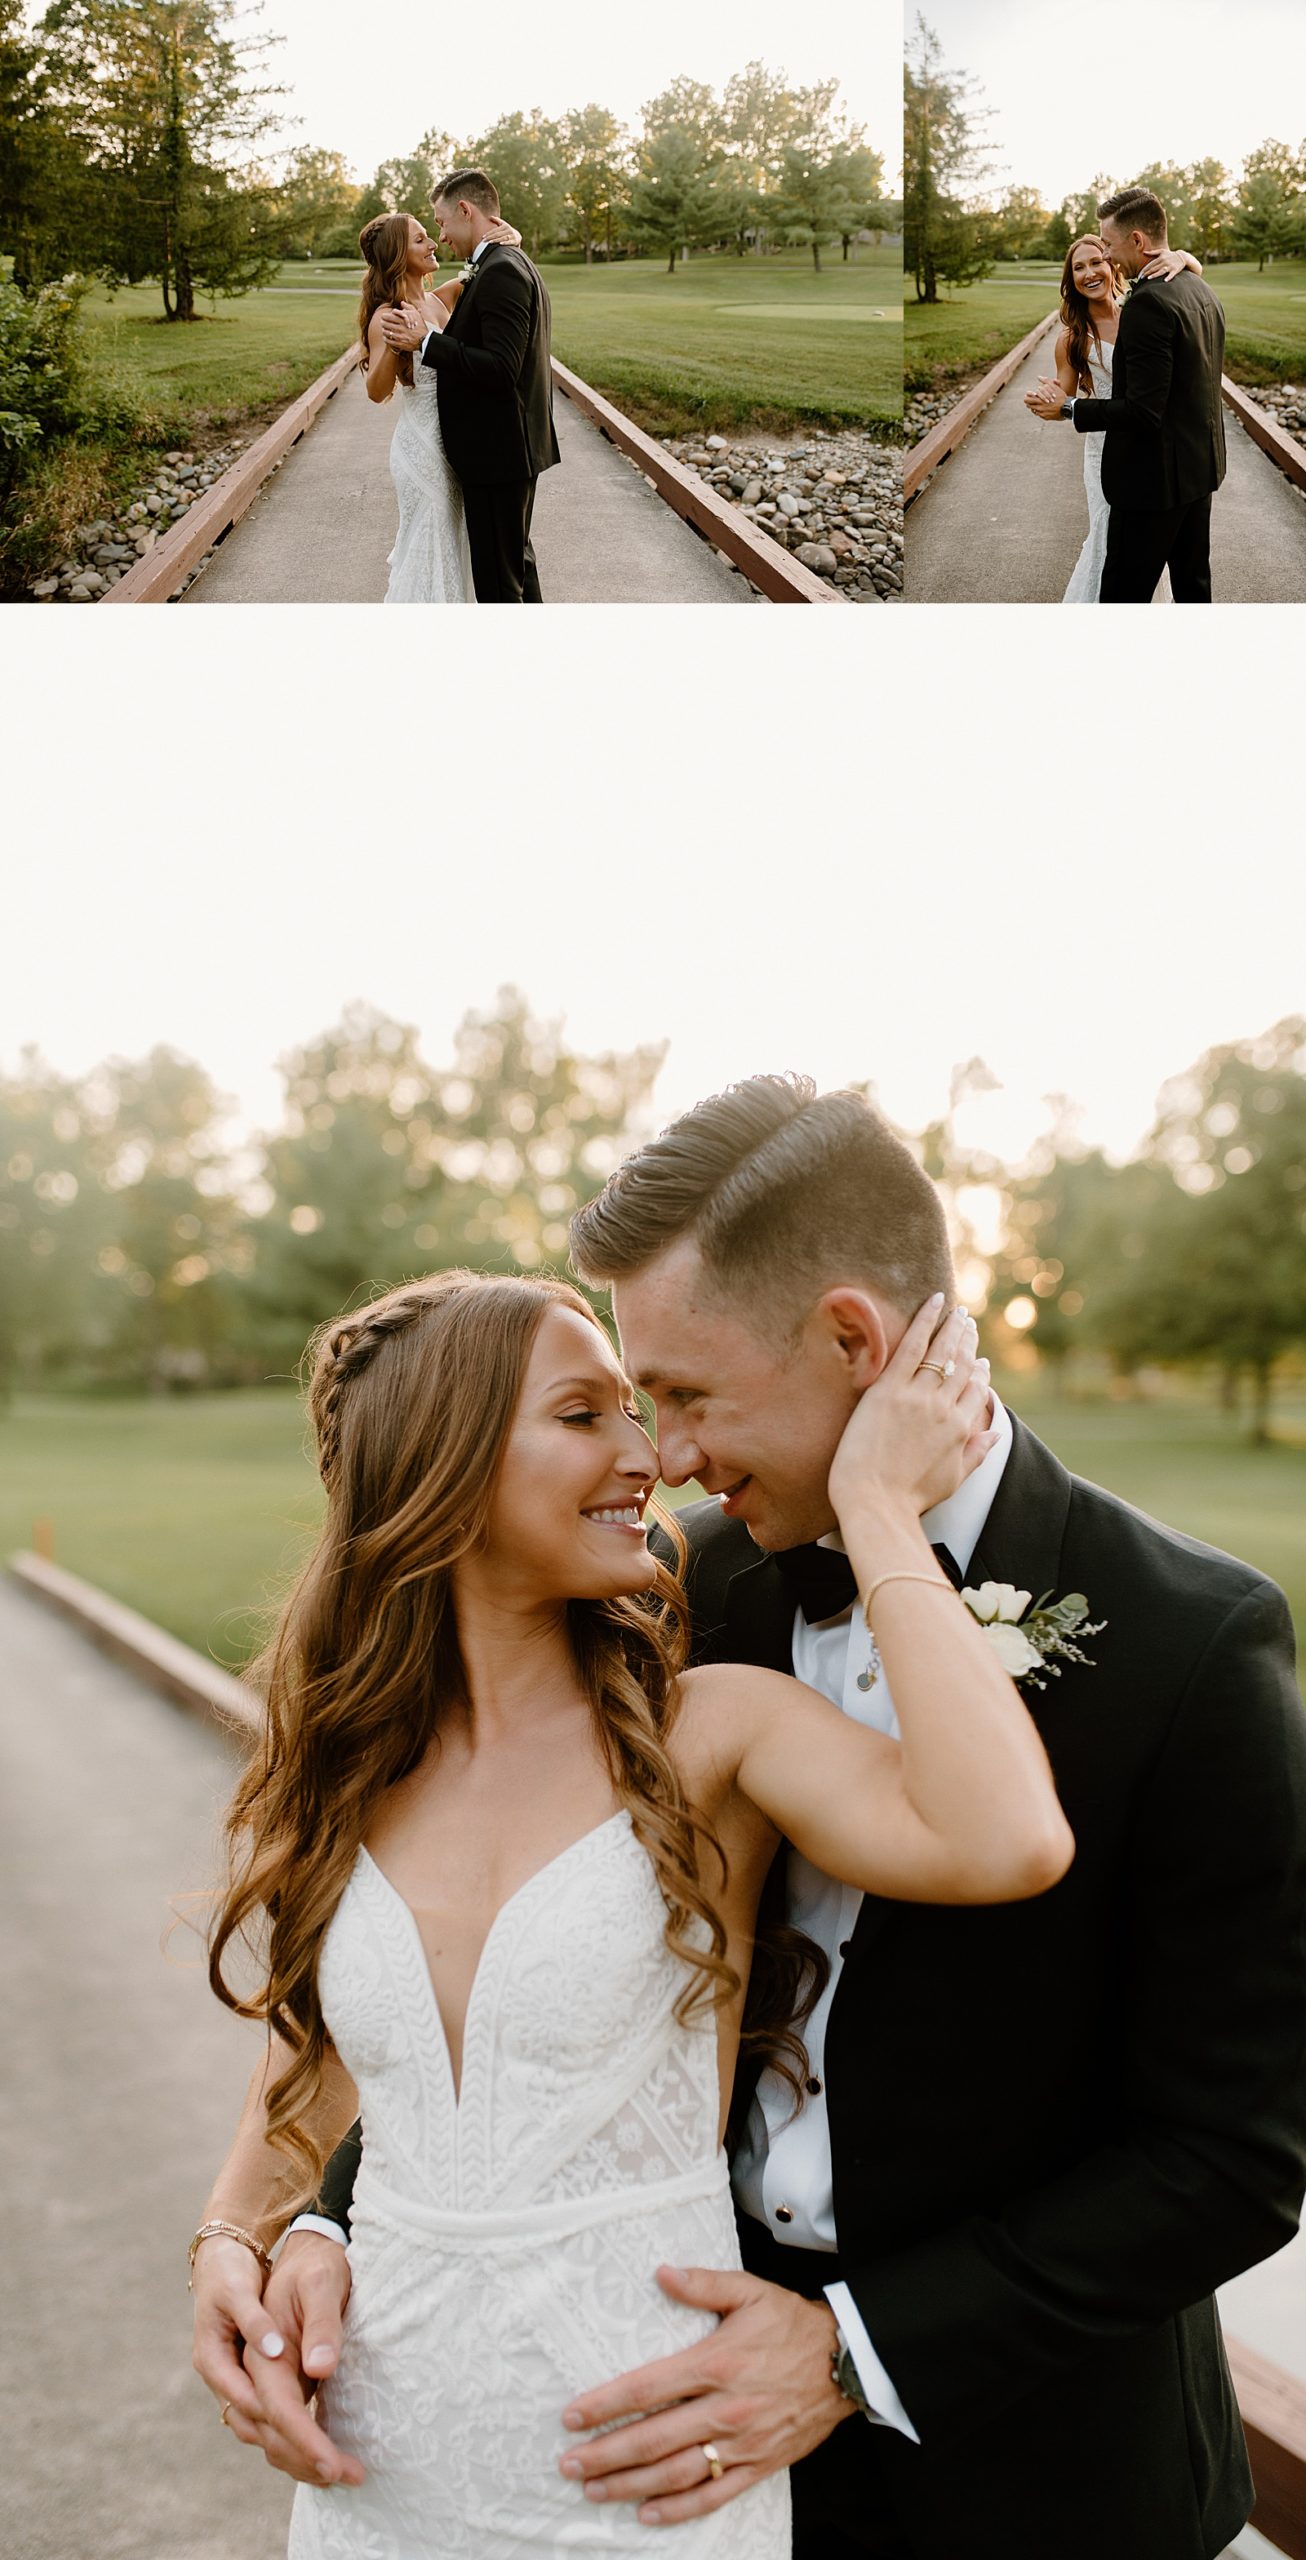 Bride and groom sharing a dance outside during golden hour by Fort Wayne photographer, Indigo Lace.